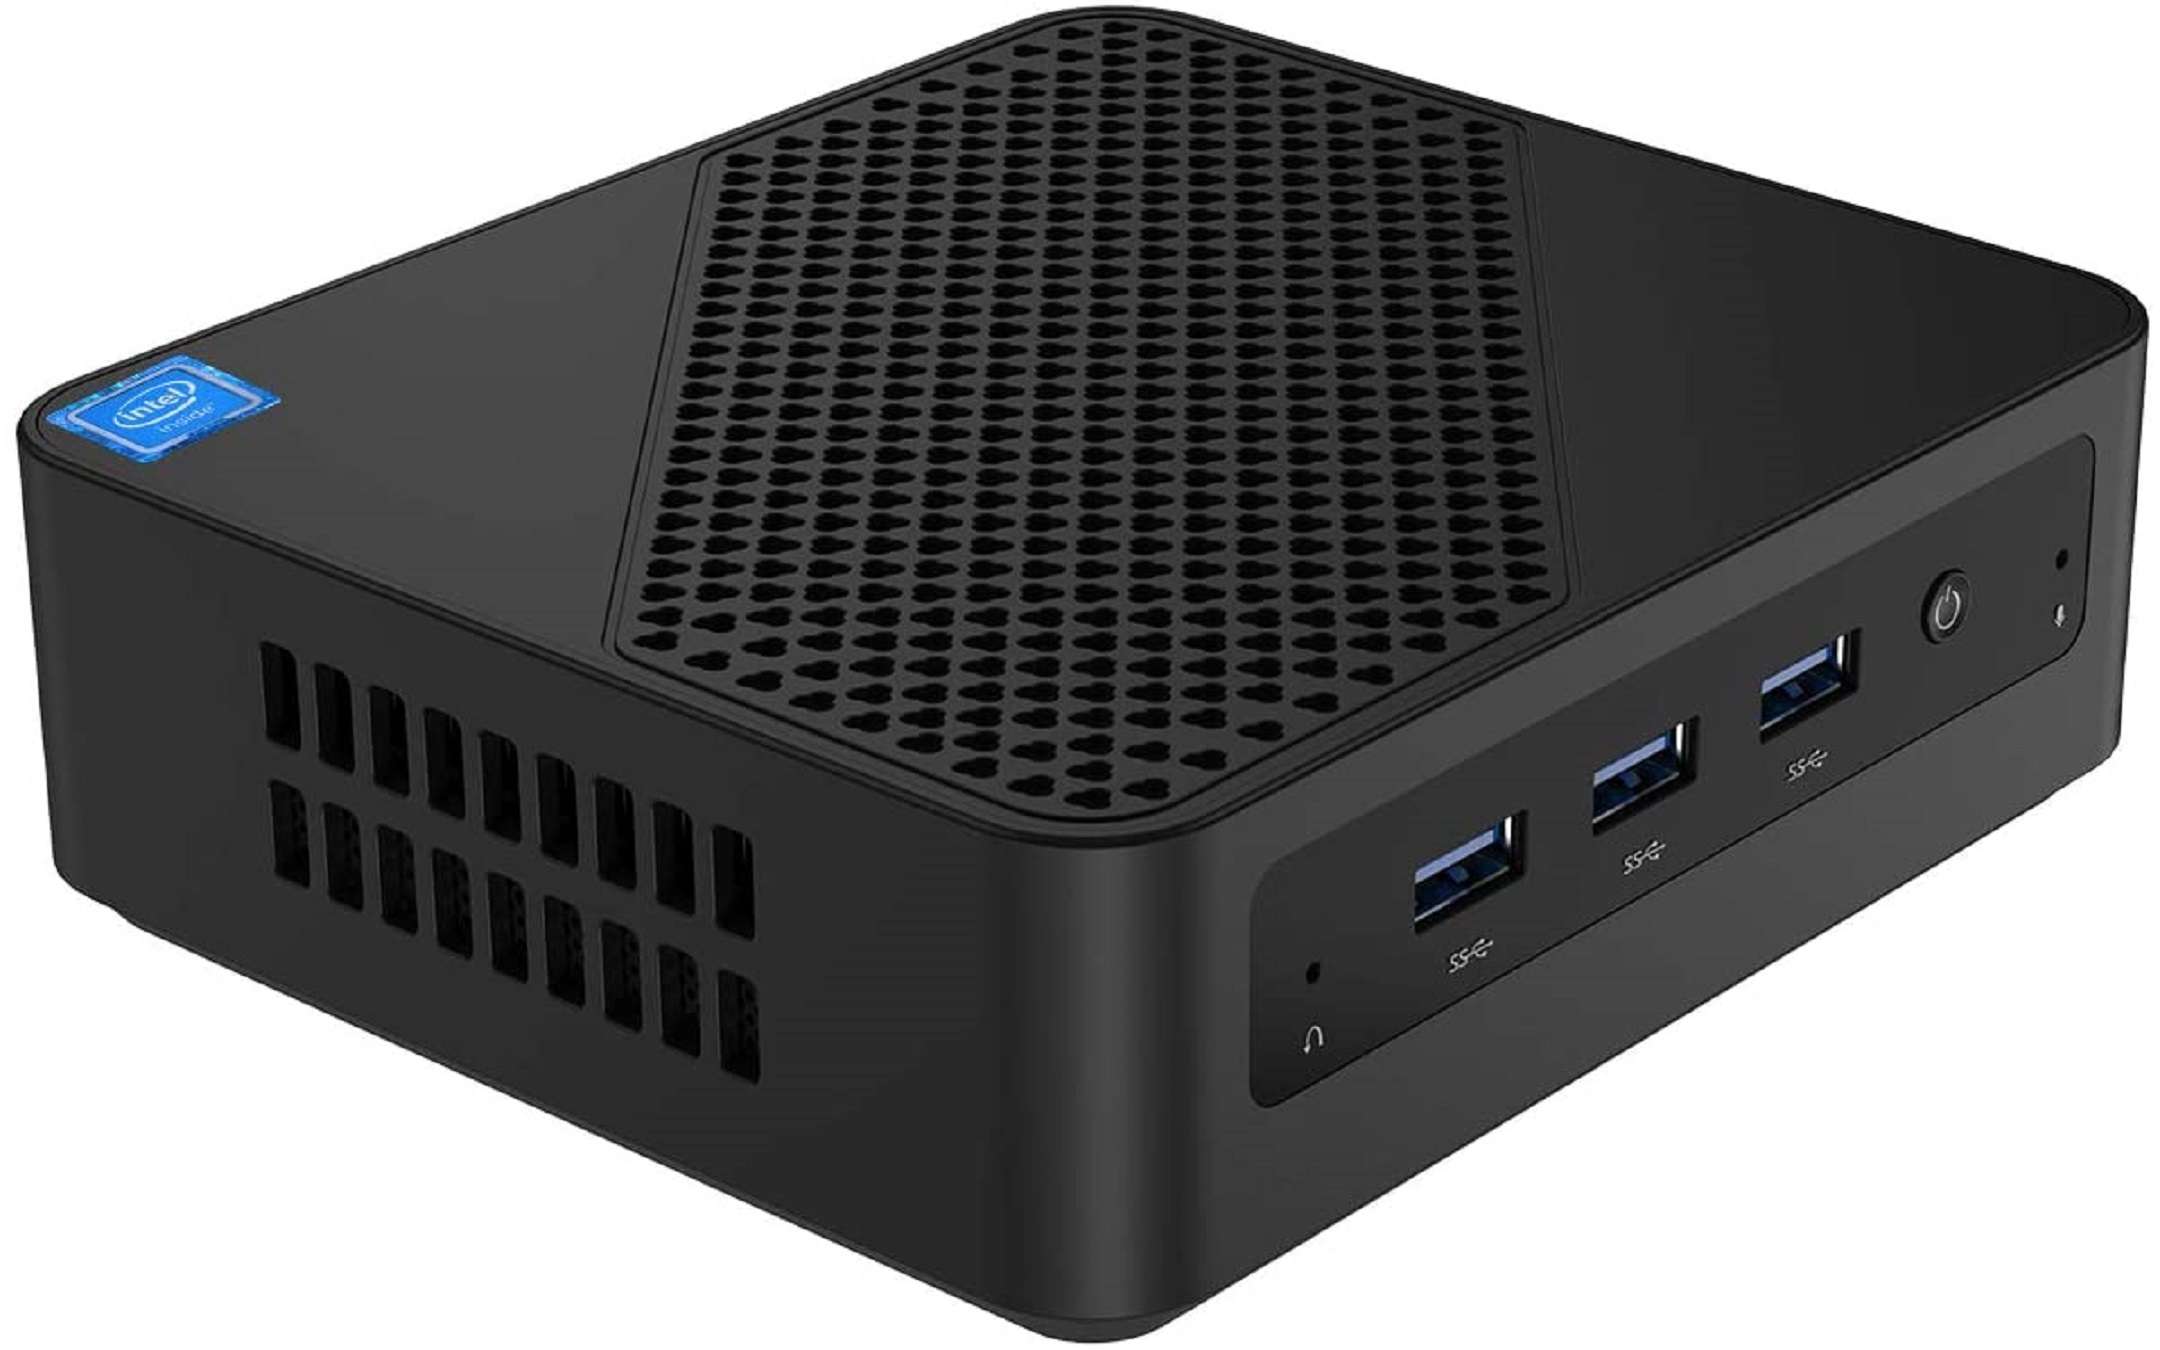 Mini PC with Intel i5 and 8GB of RAM at an incredible price!